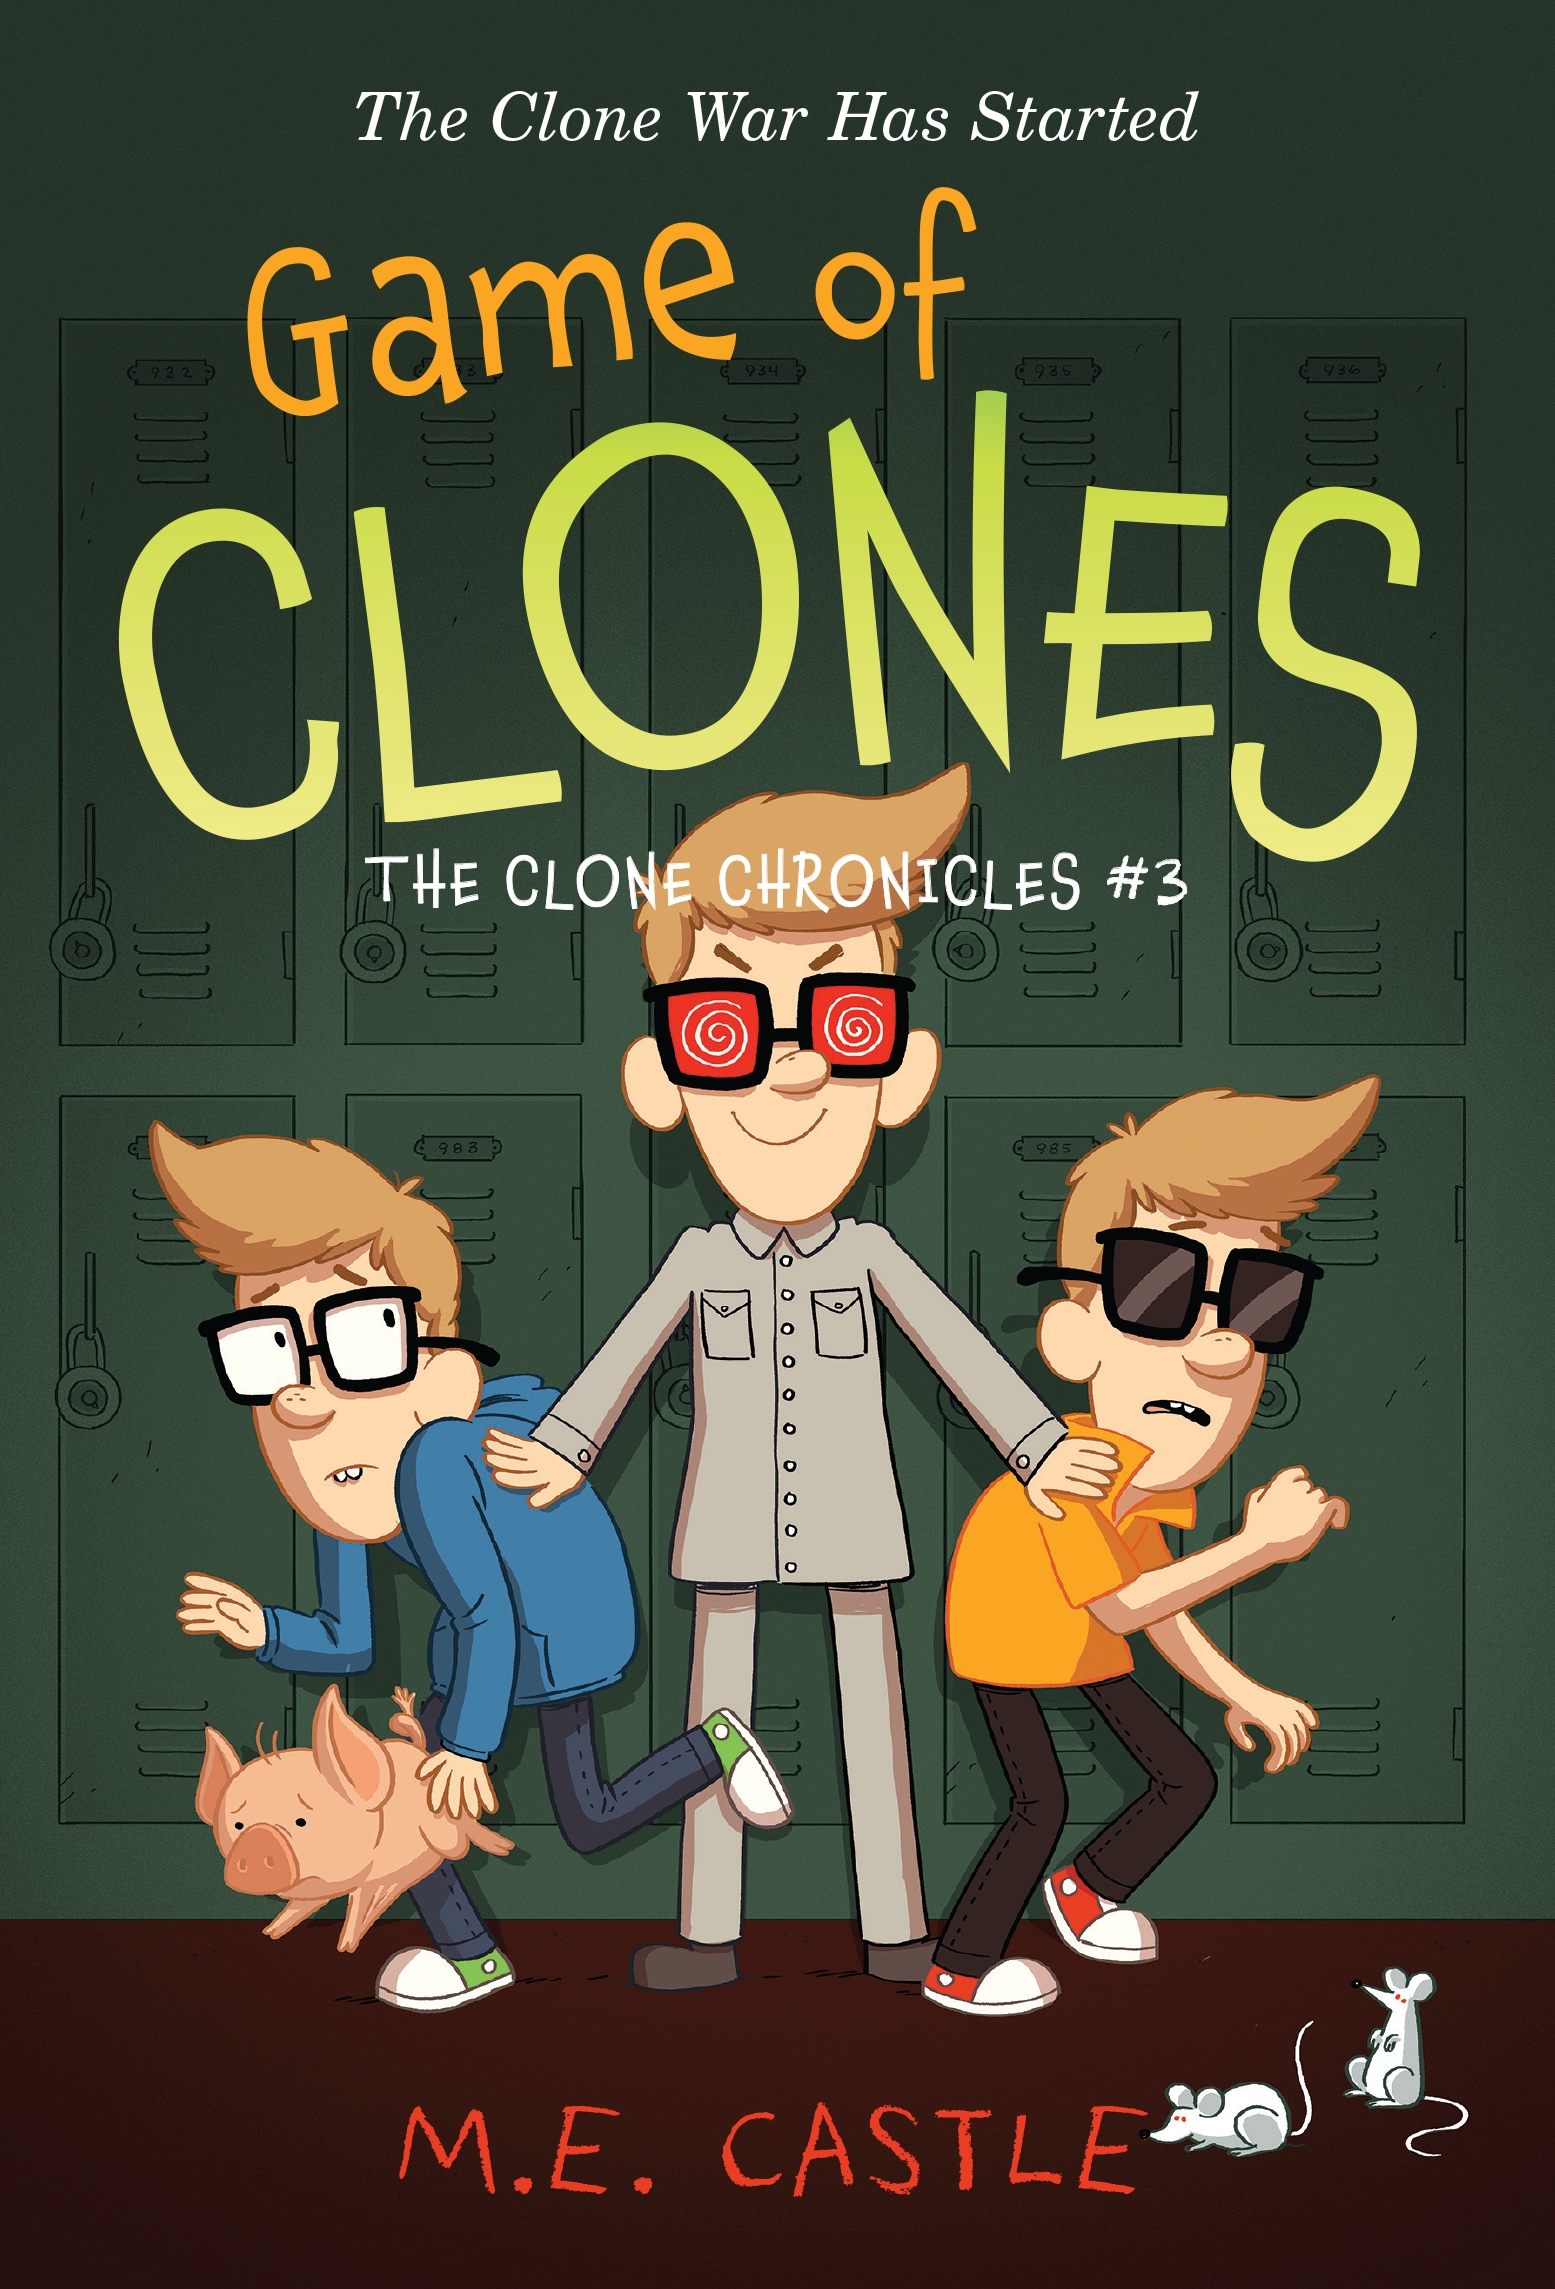 Game of clones: the clone chronicles #3 cover image